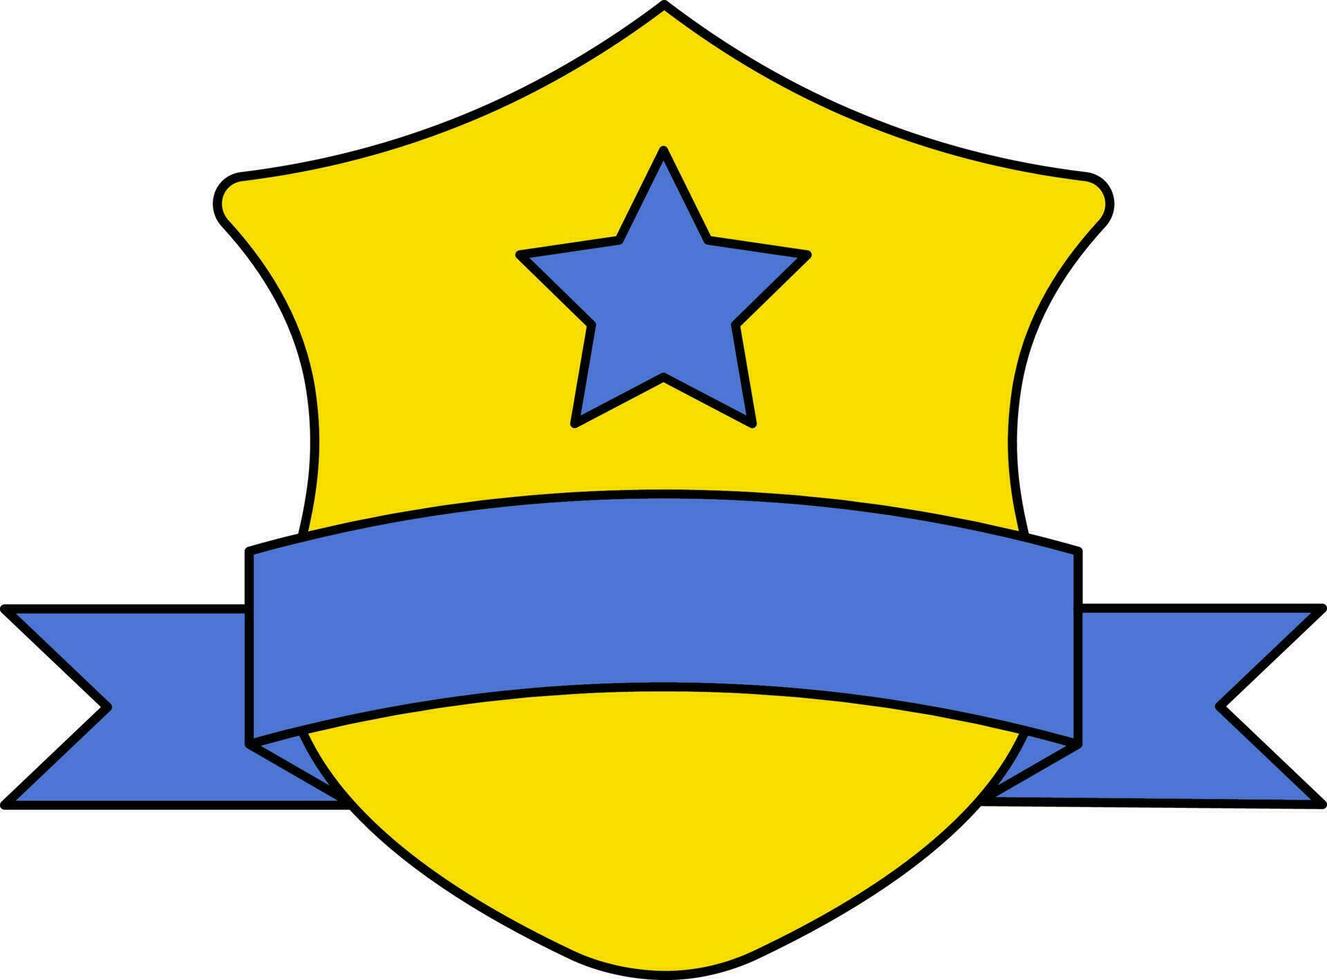 Illustration Of Award Shield Icon In Blue And Yellow Color. vector